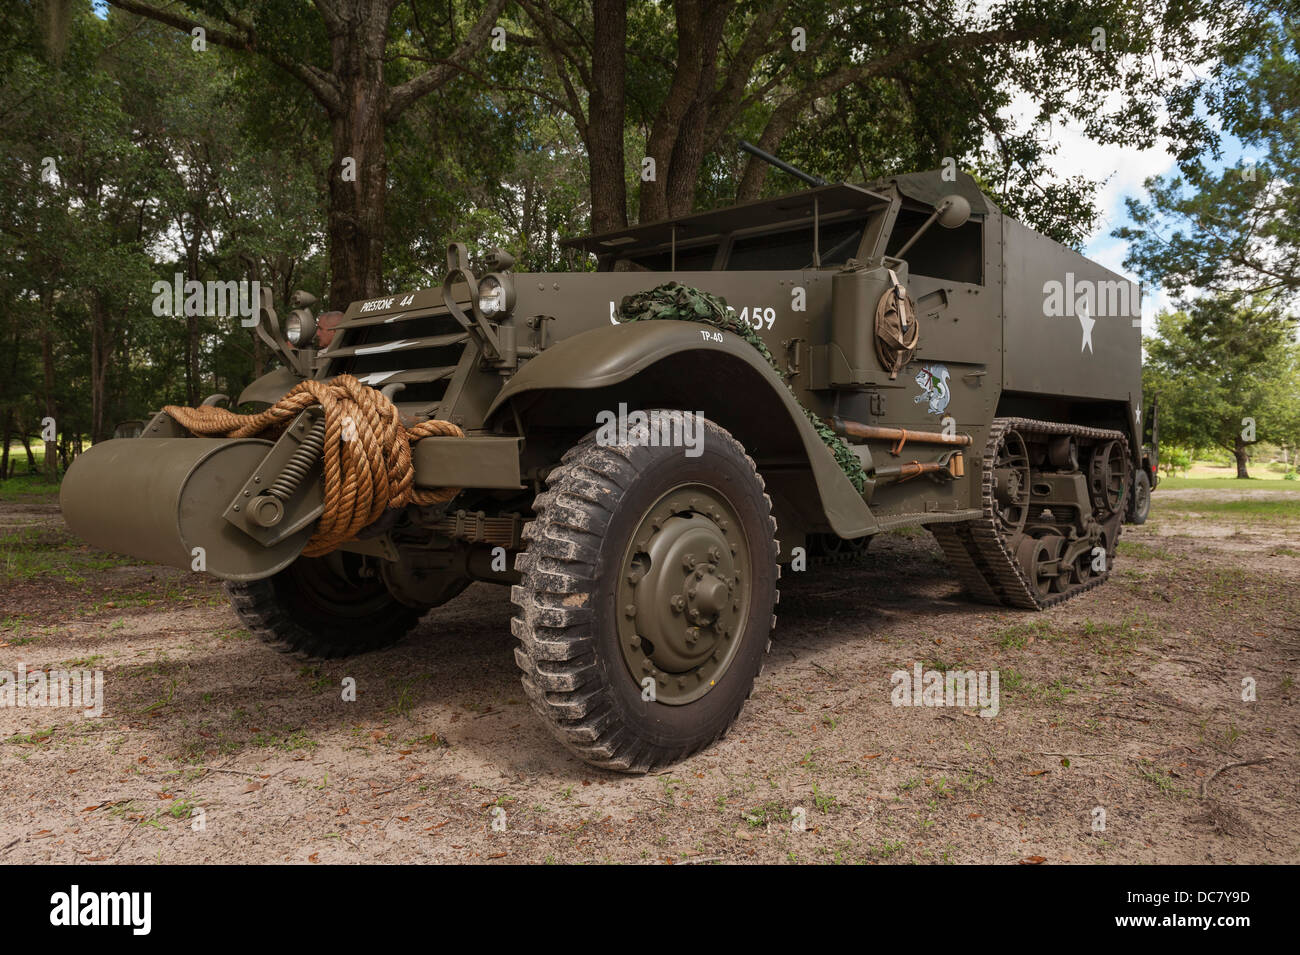 A 1943 M15 Halftrack military vehicle with a 50mm gun restored and being shown at a club meet in Central Florida USA. Stock Photo